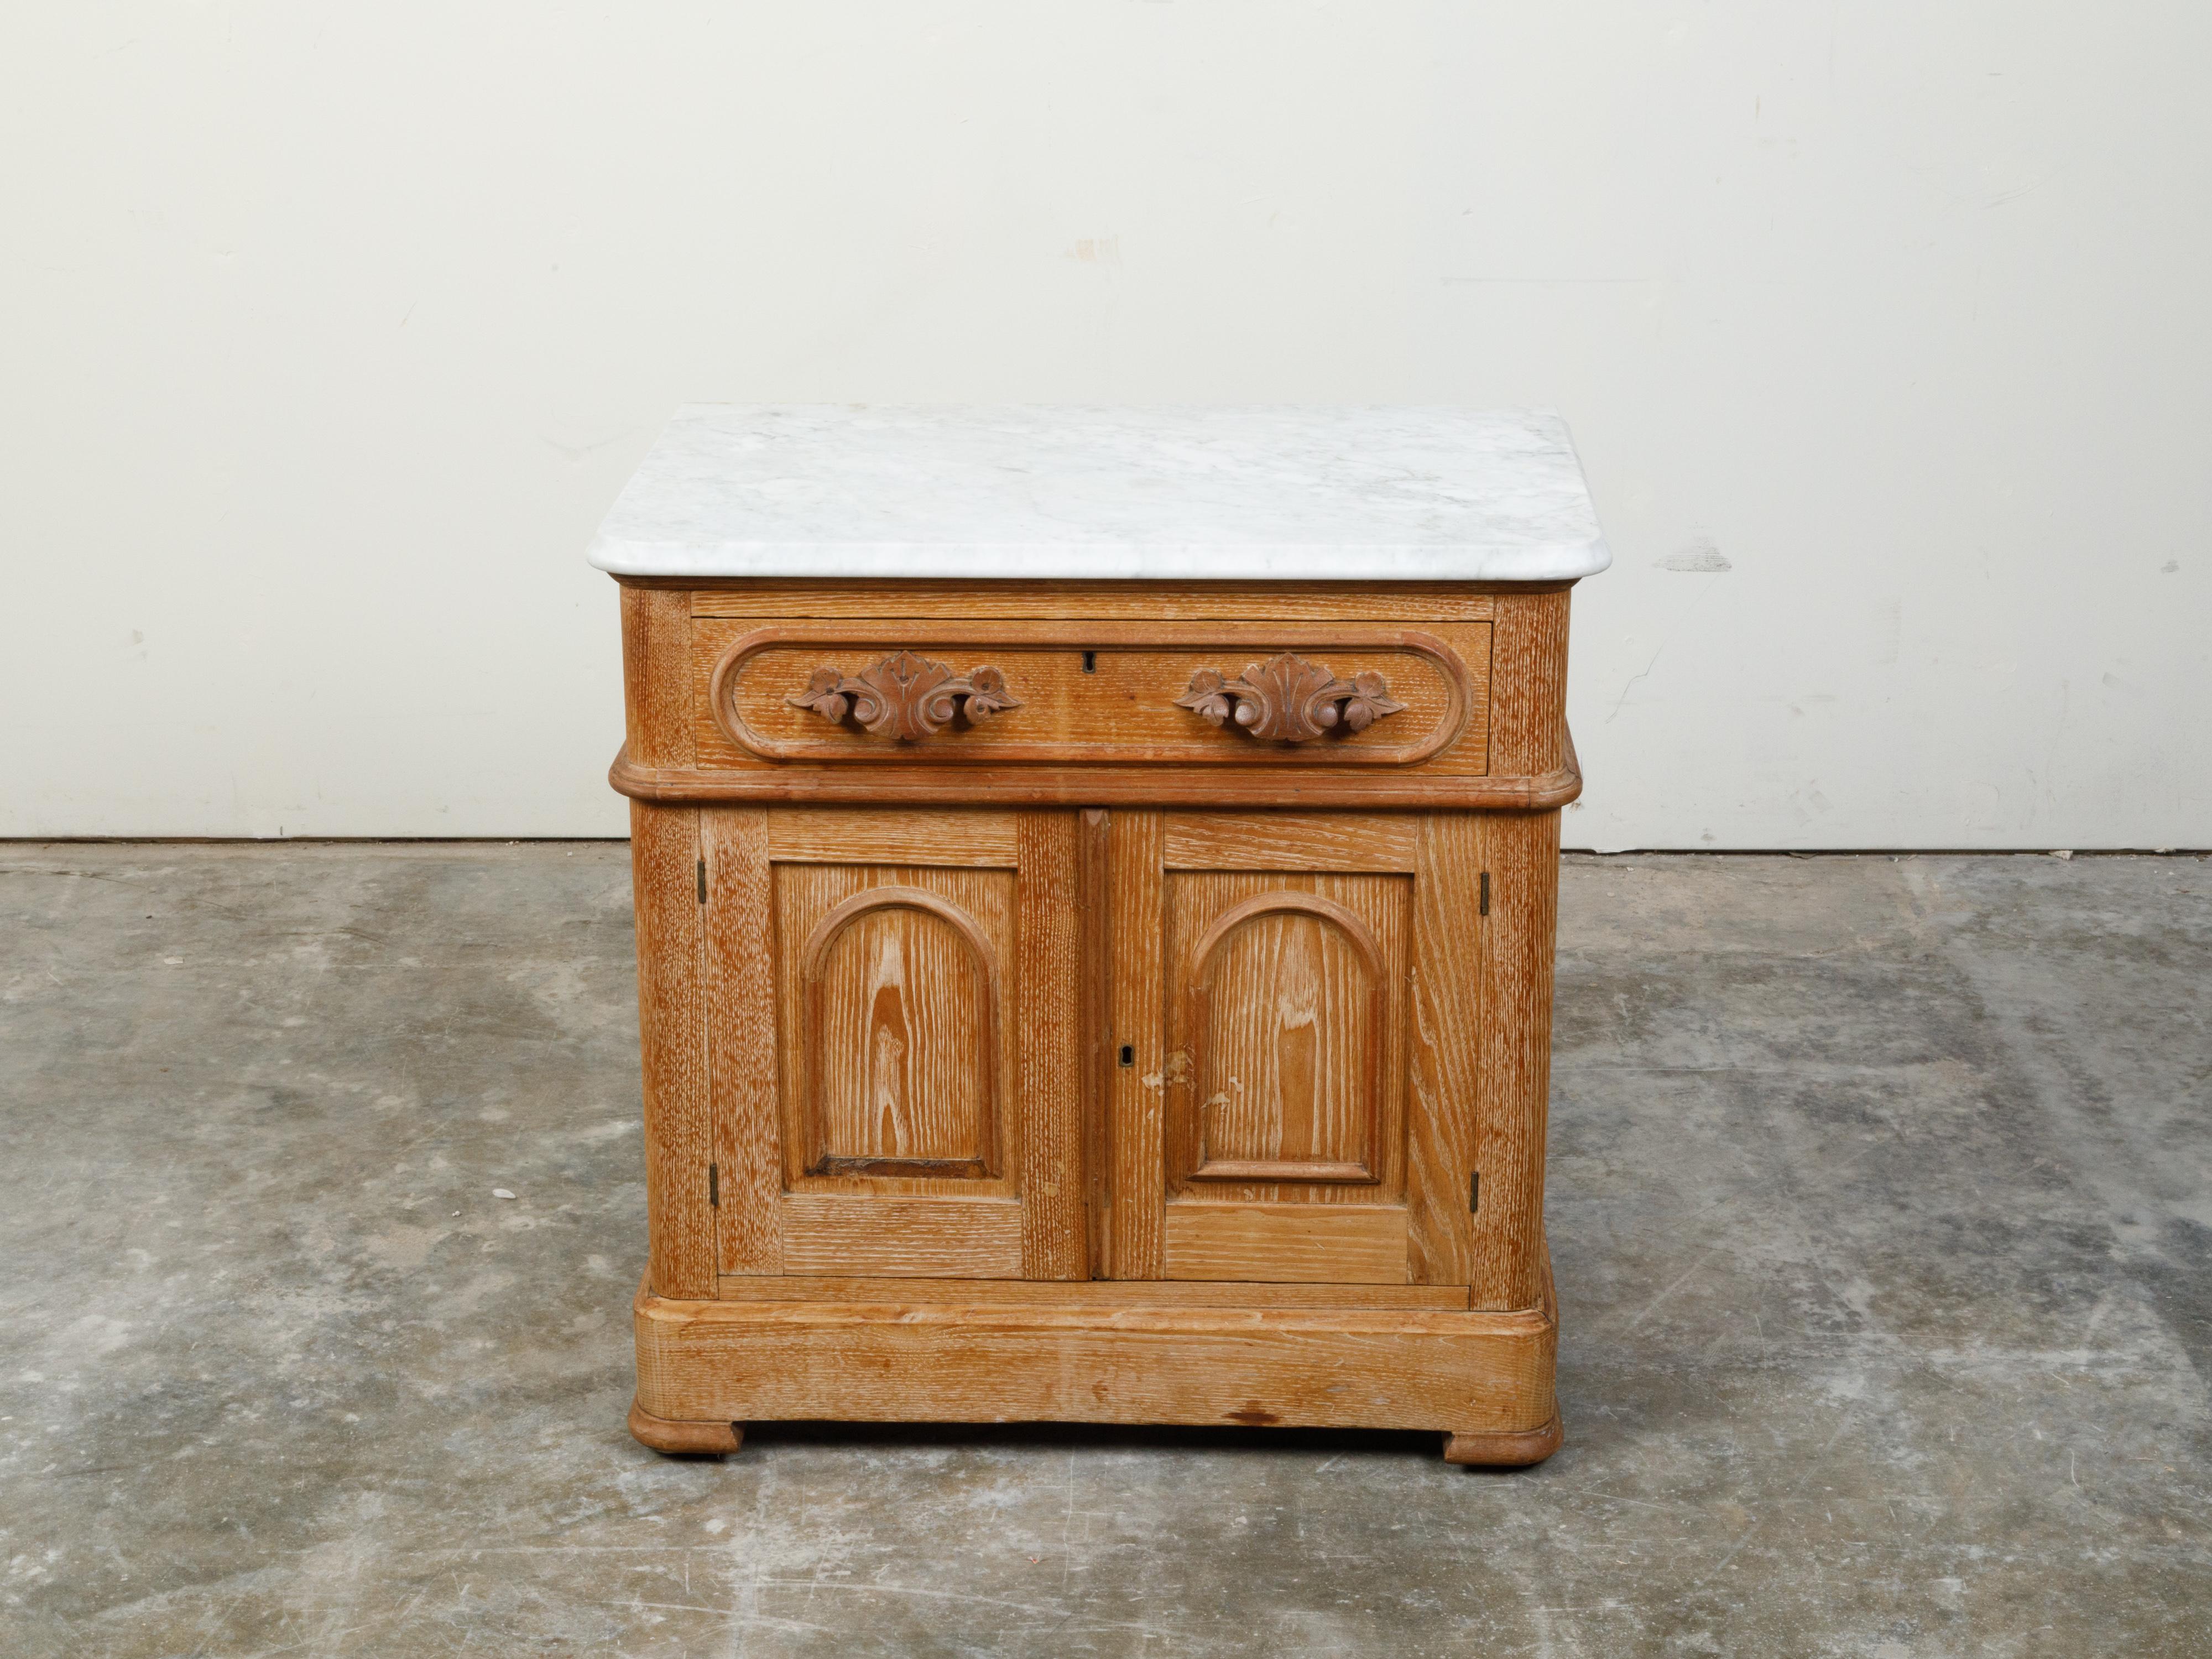 An English pine or chestnut small cabinet from the late 19th century, with white marble top, carved drawer and two doors. Created in England during the last quarter of the 19th century, this small cabinet features a rectangular white marble top with